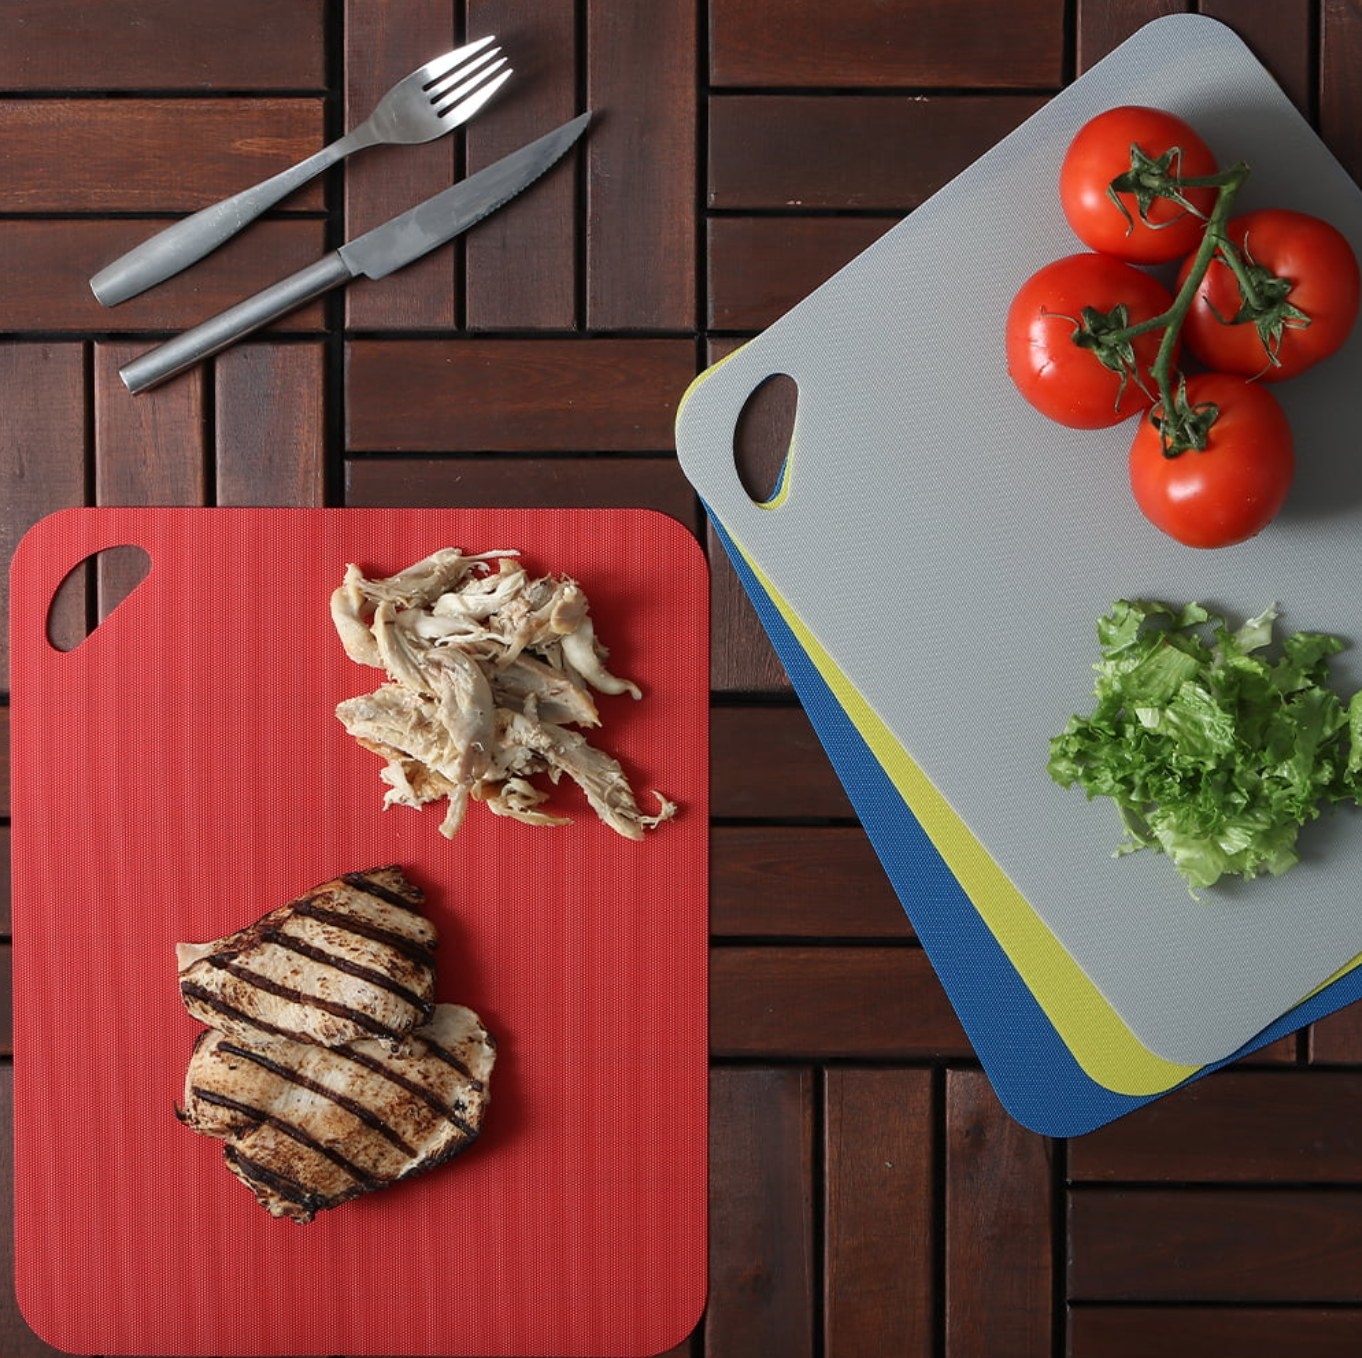 the red cutting board with chopped chicken on it, on a counter next to the blue, yellow, and grey boards. the grey board has tomatoes and chopped lettuce